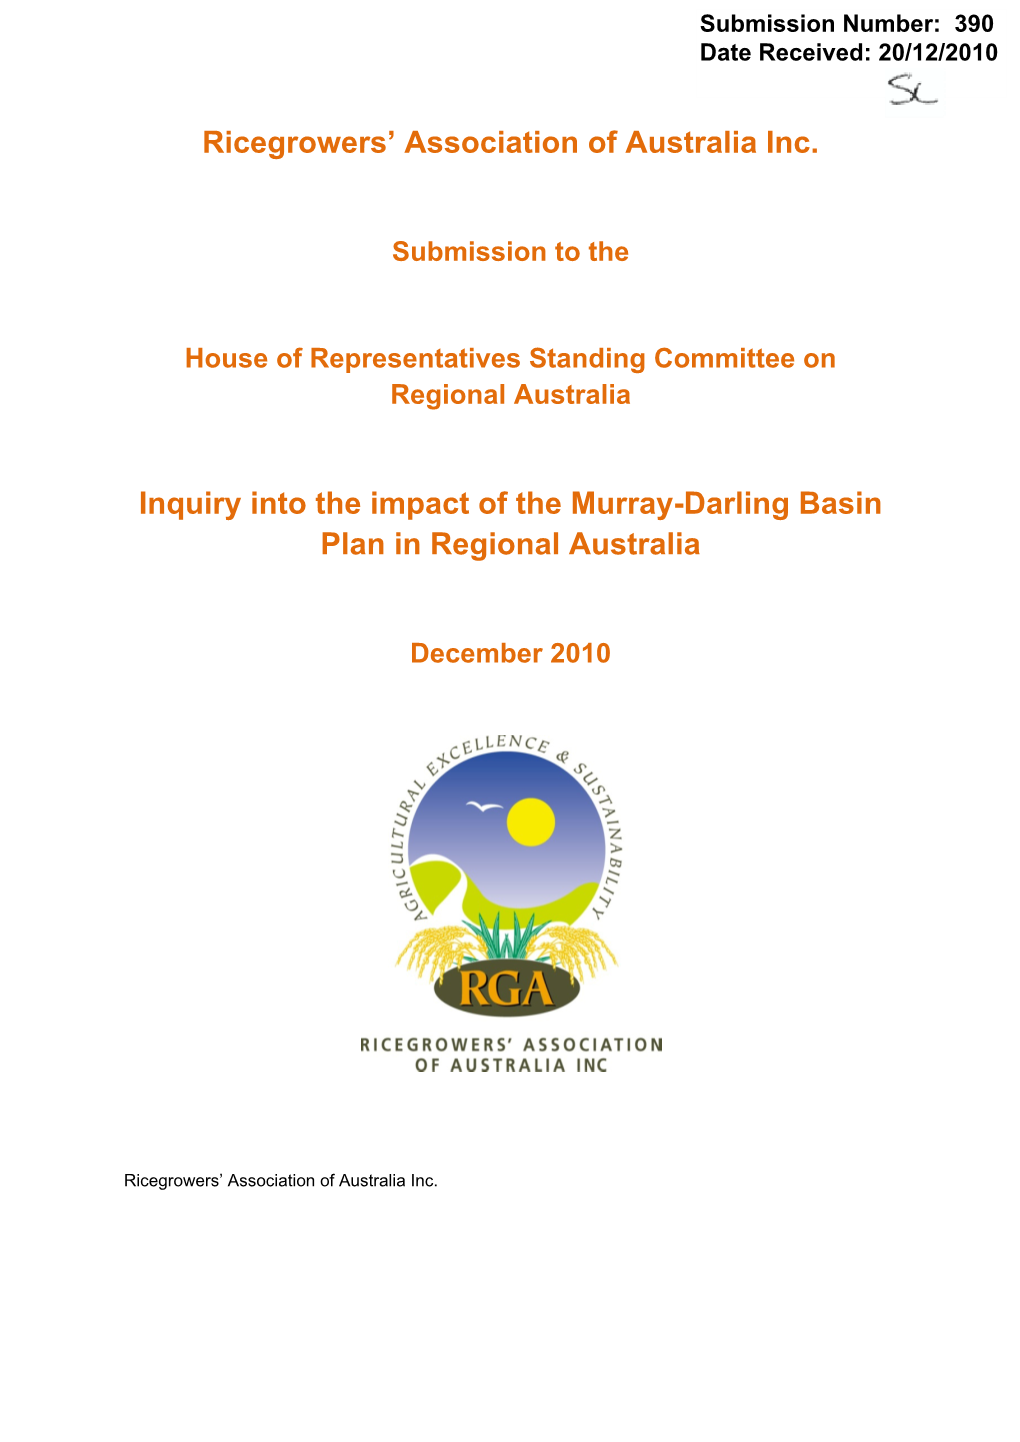 Ricegrowers' Association of Australia Inc. Inquiry Into the Impact of The